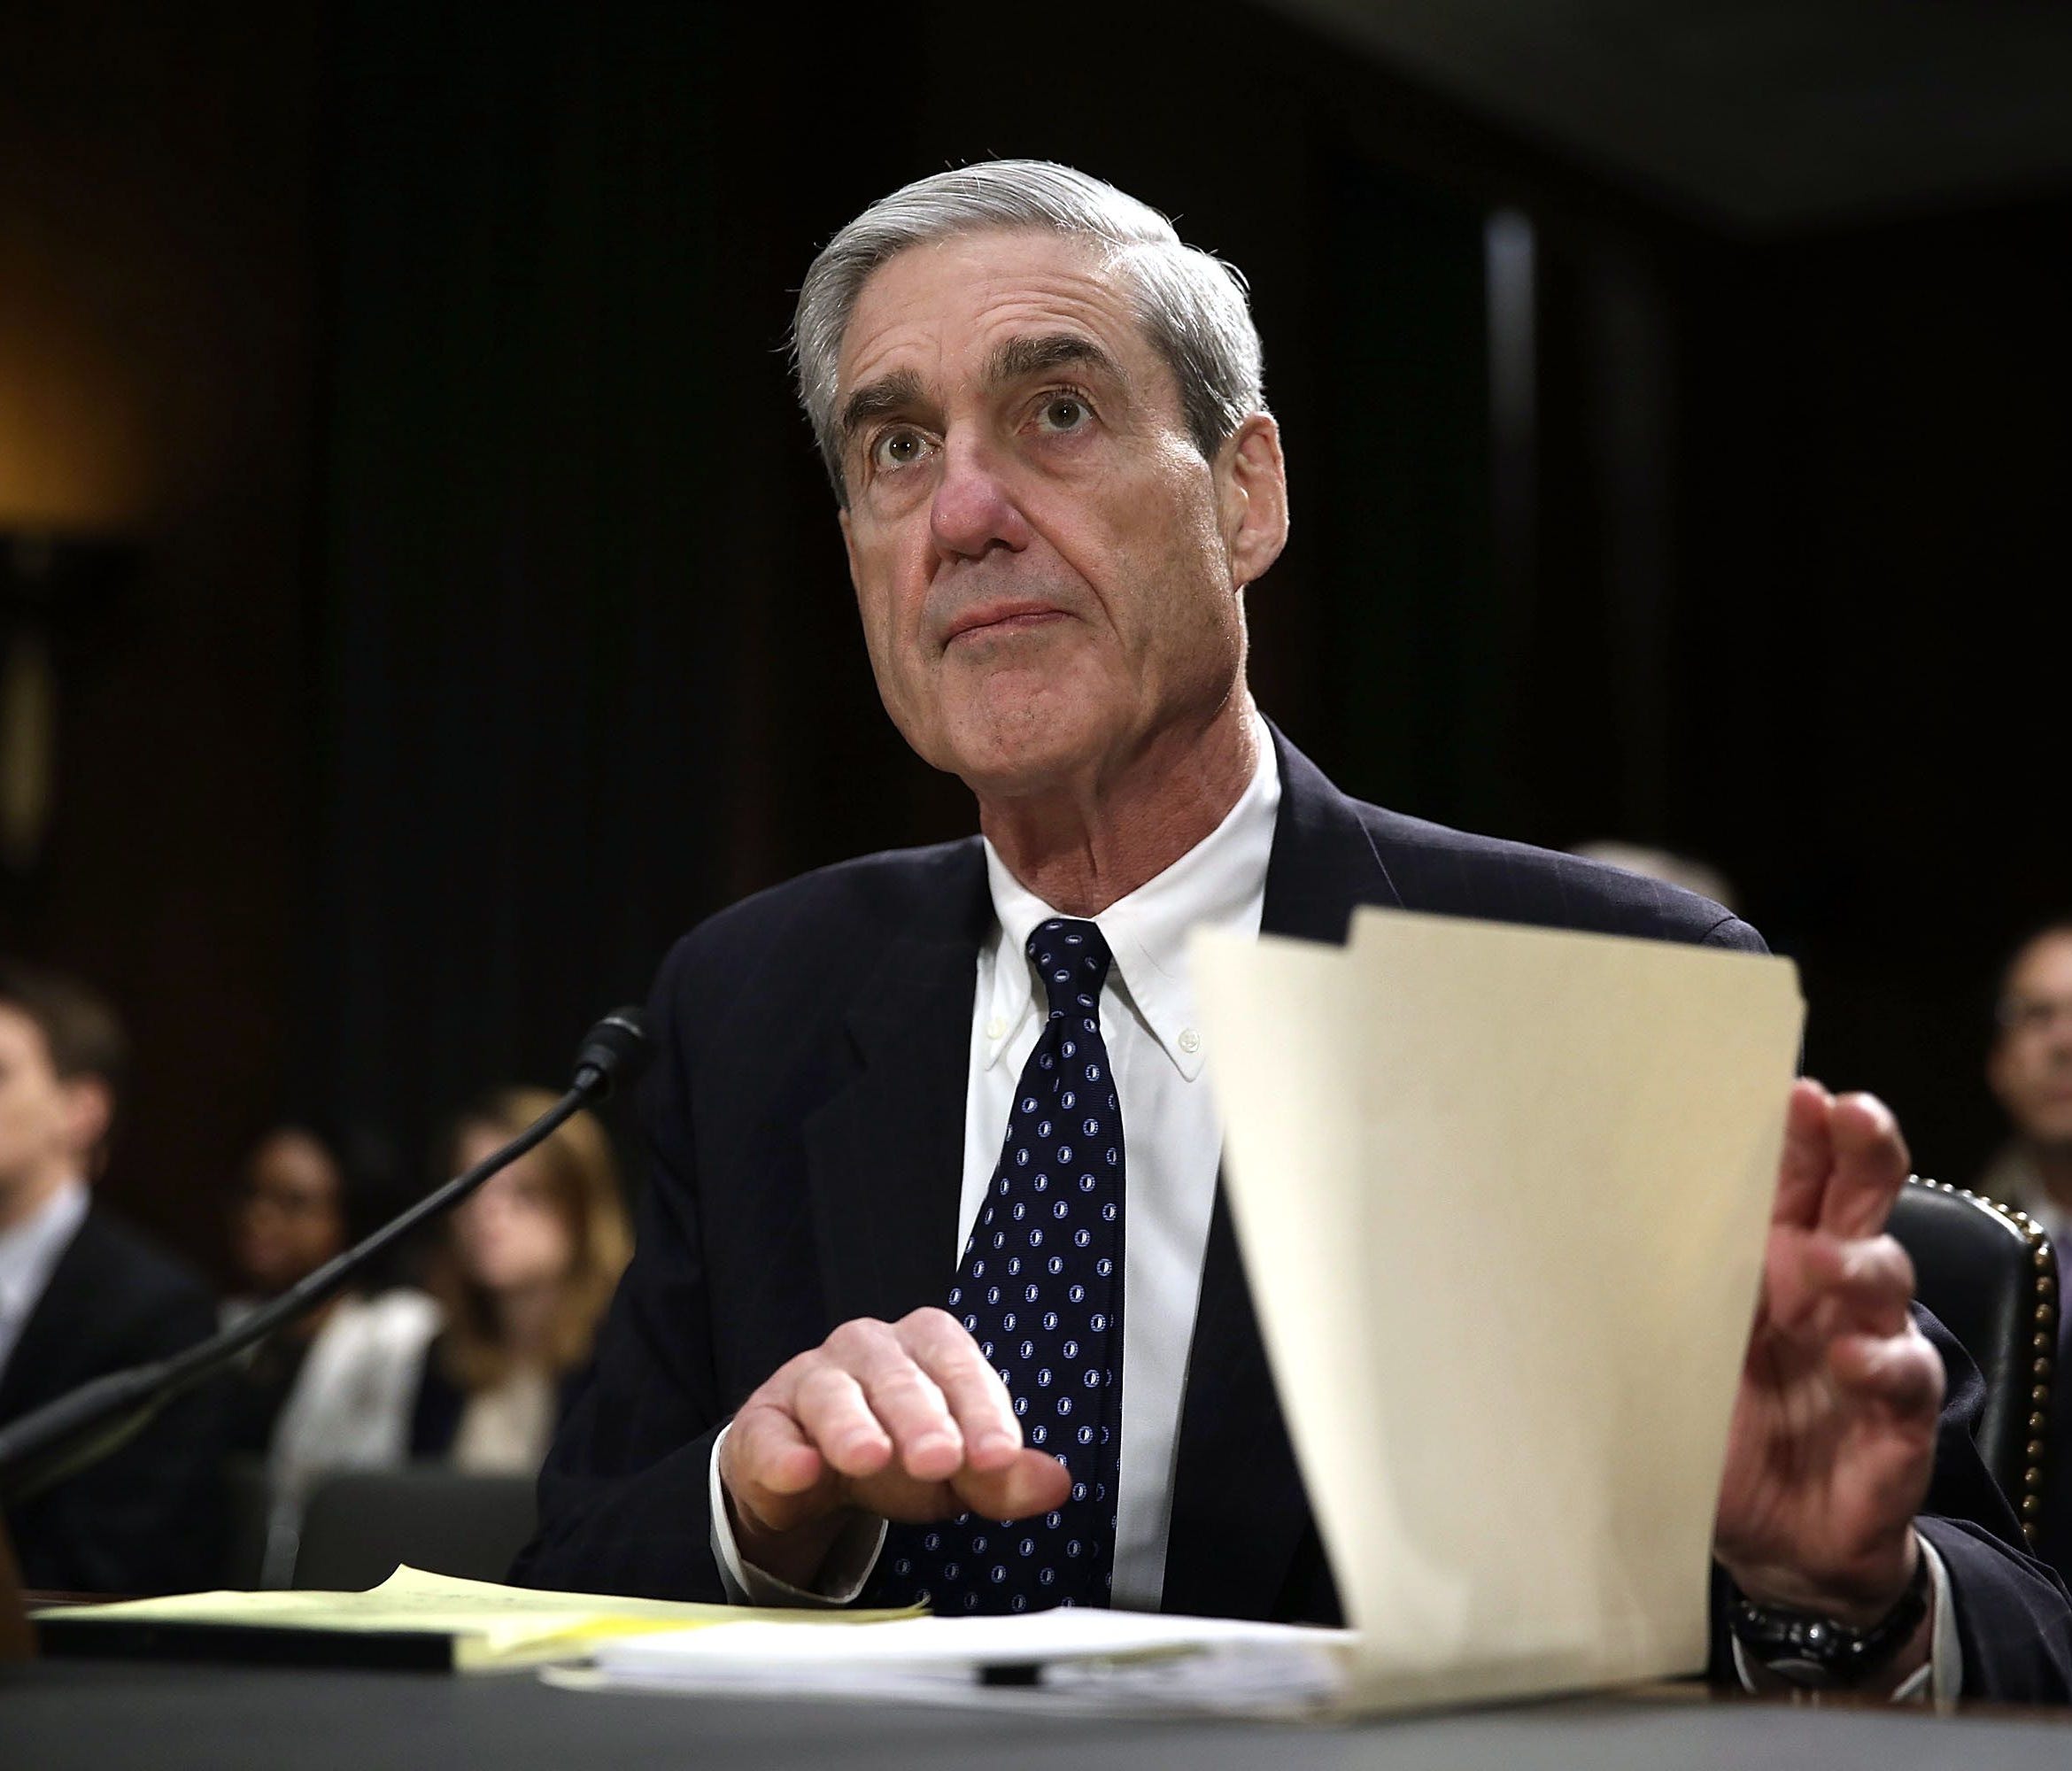 Robert Mueller waits for the beginning of a hearing before the Senate Judiciary Committee on June 19, 2013.